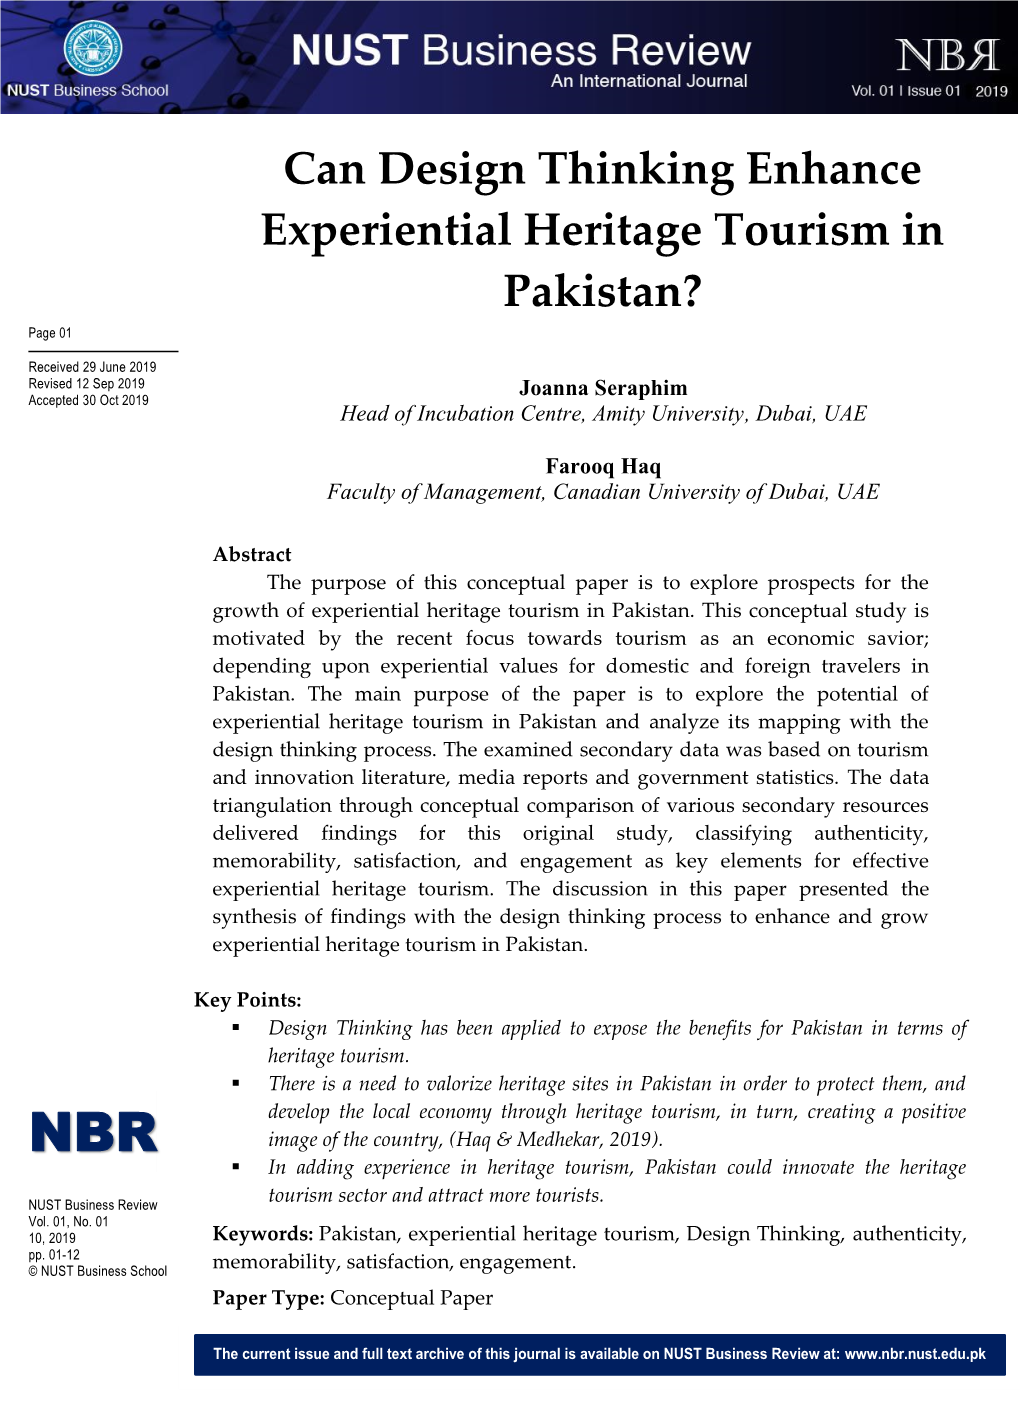 Can Design Thinking Enhance Experiential Heritage Tourism in Pakistan?